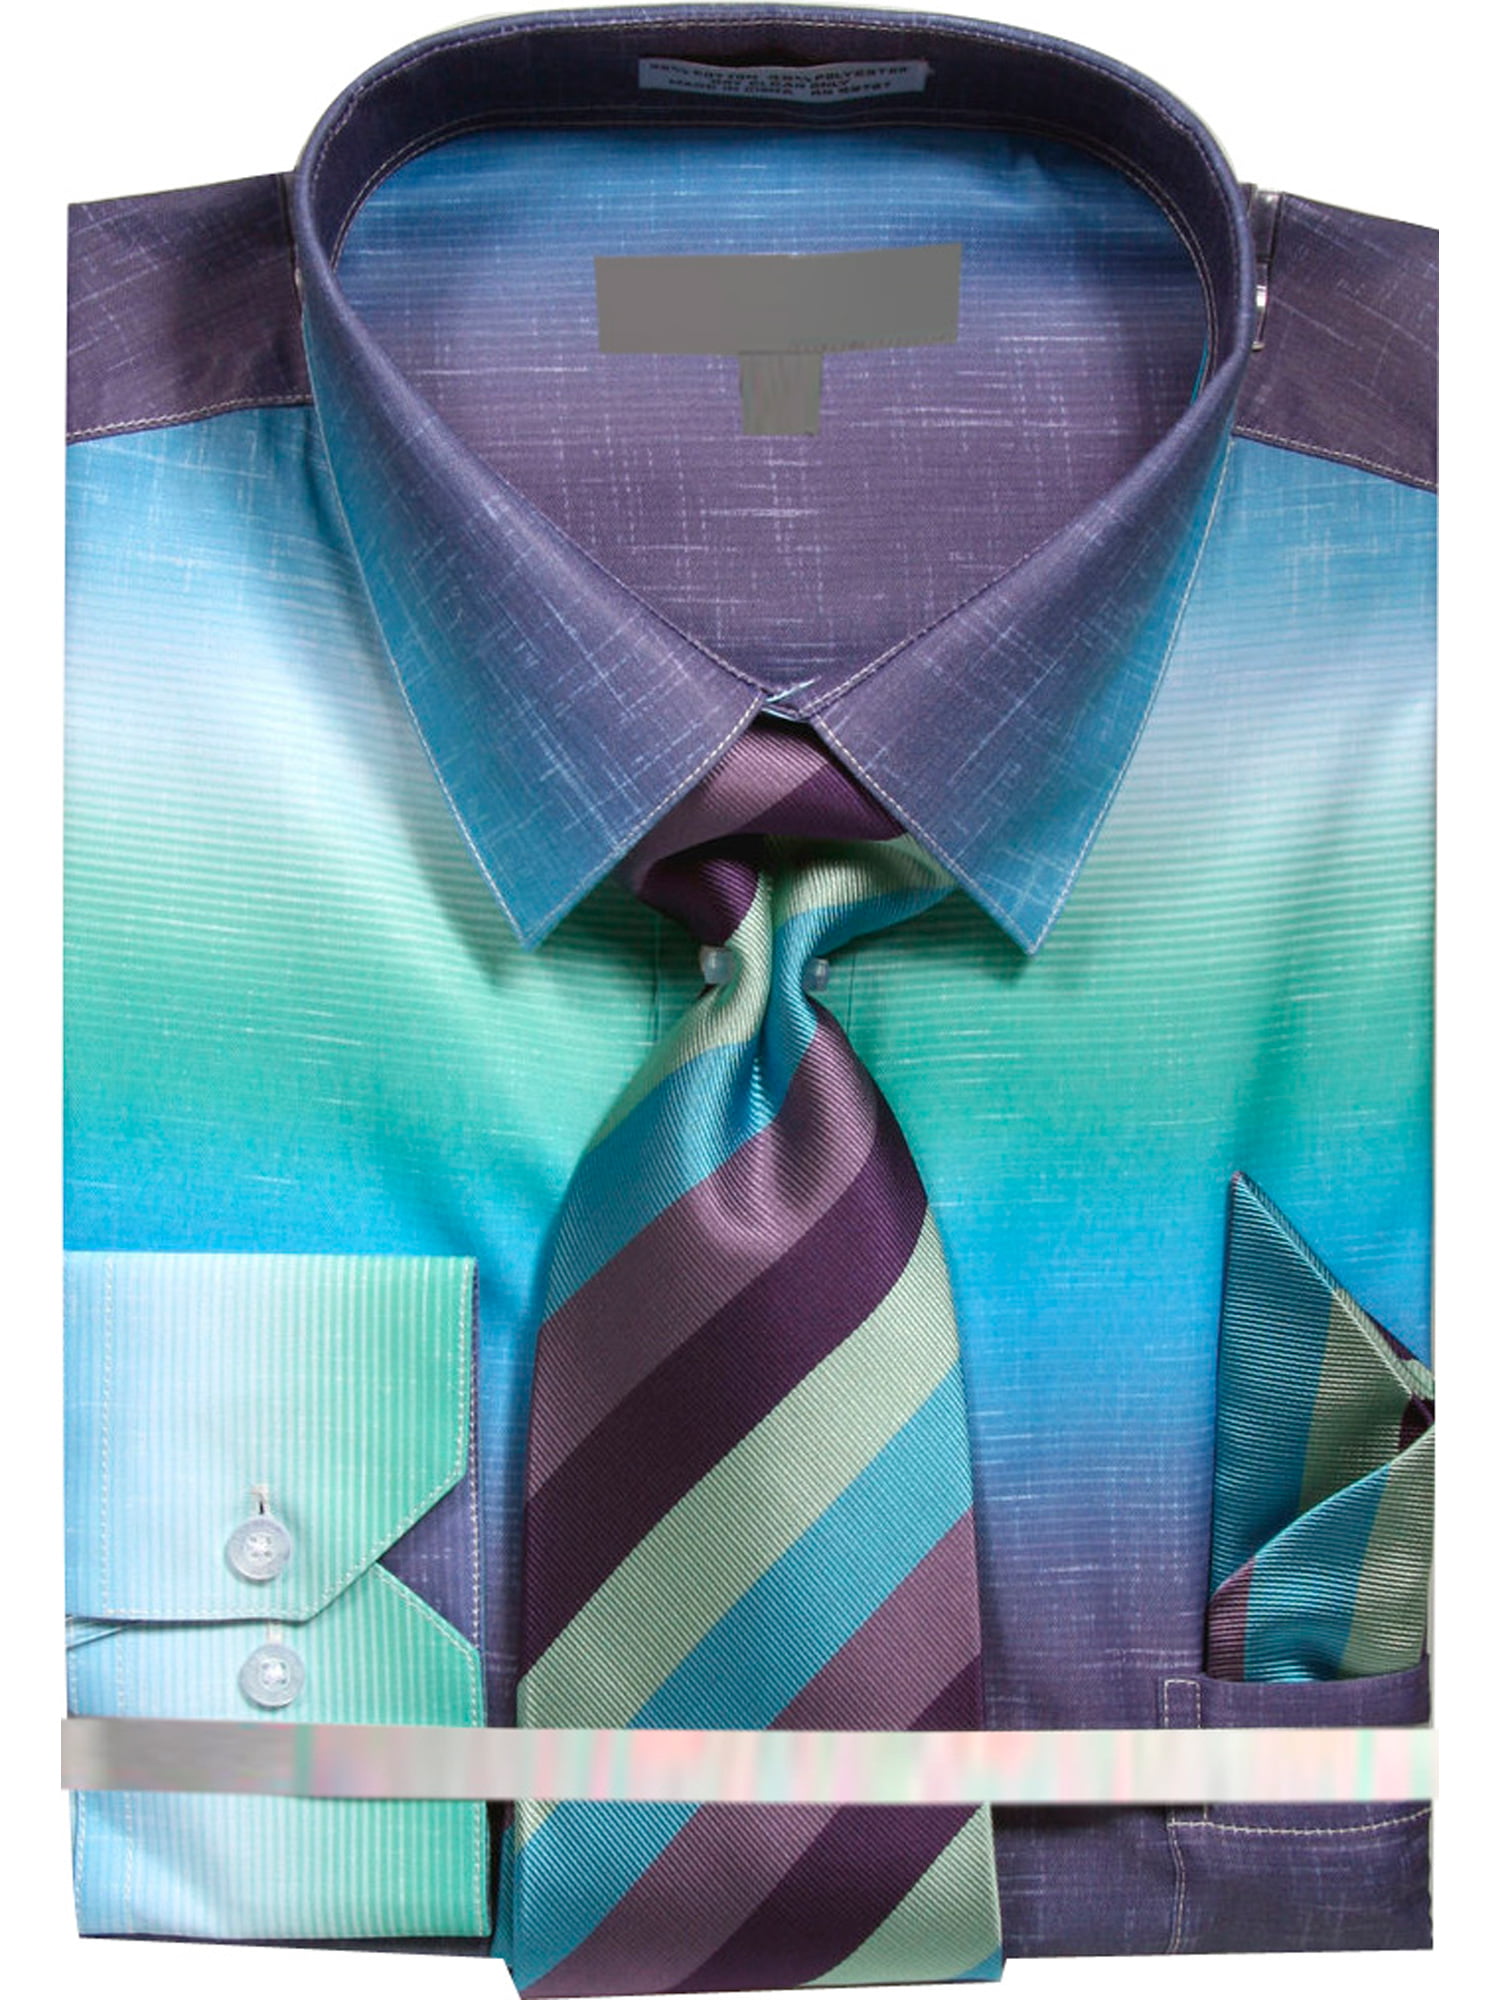 Men's Cotton Blend Dress Shirt with Tie and Handkerchief in 25 different colors 